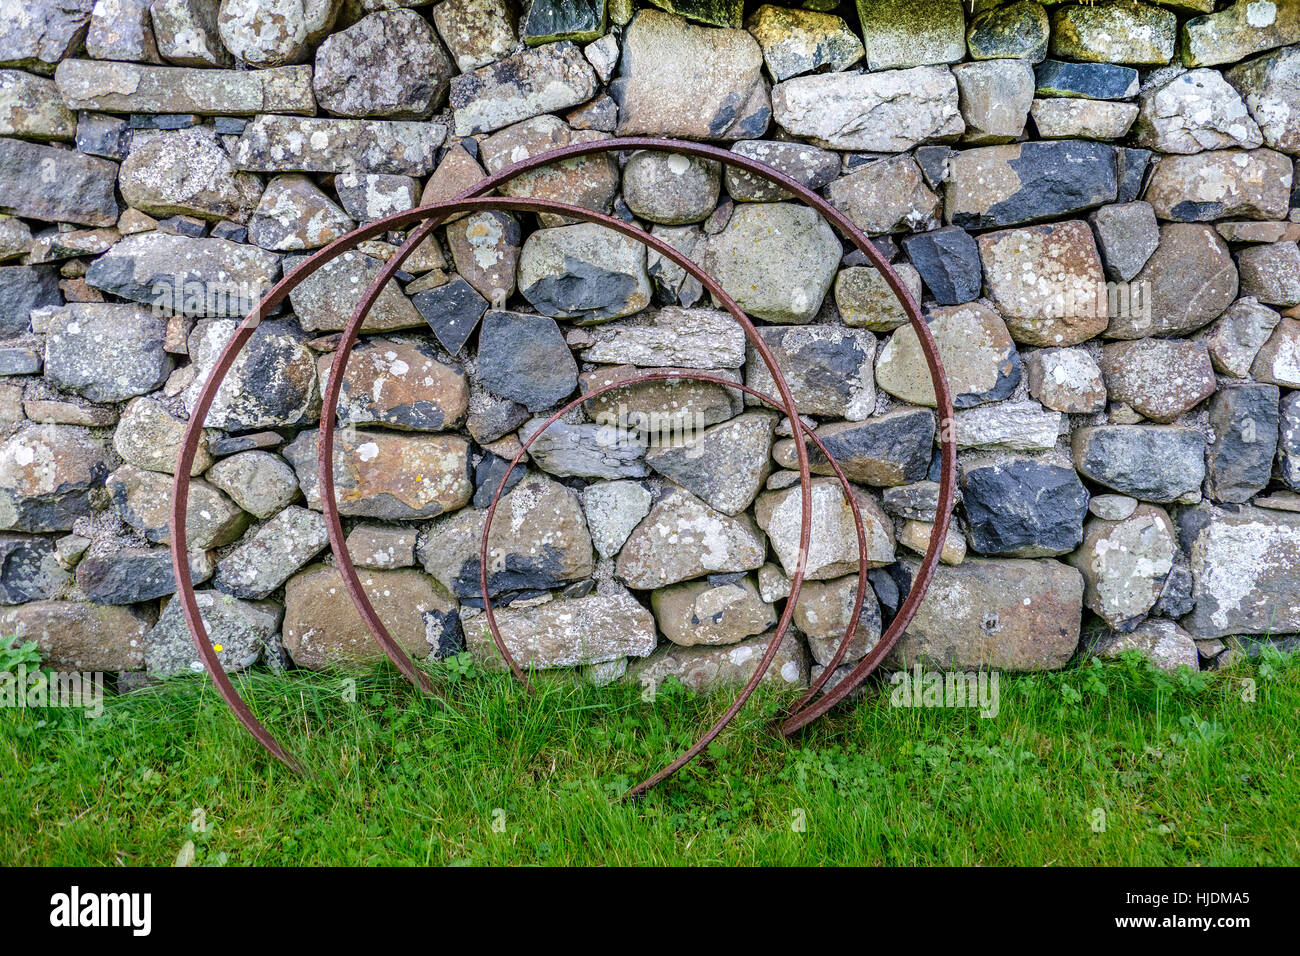 Rusting metal hoops against old lichen covered stone wall with grass and weeds foreground Stock Photo